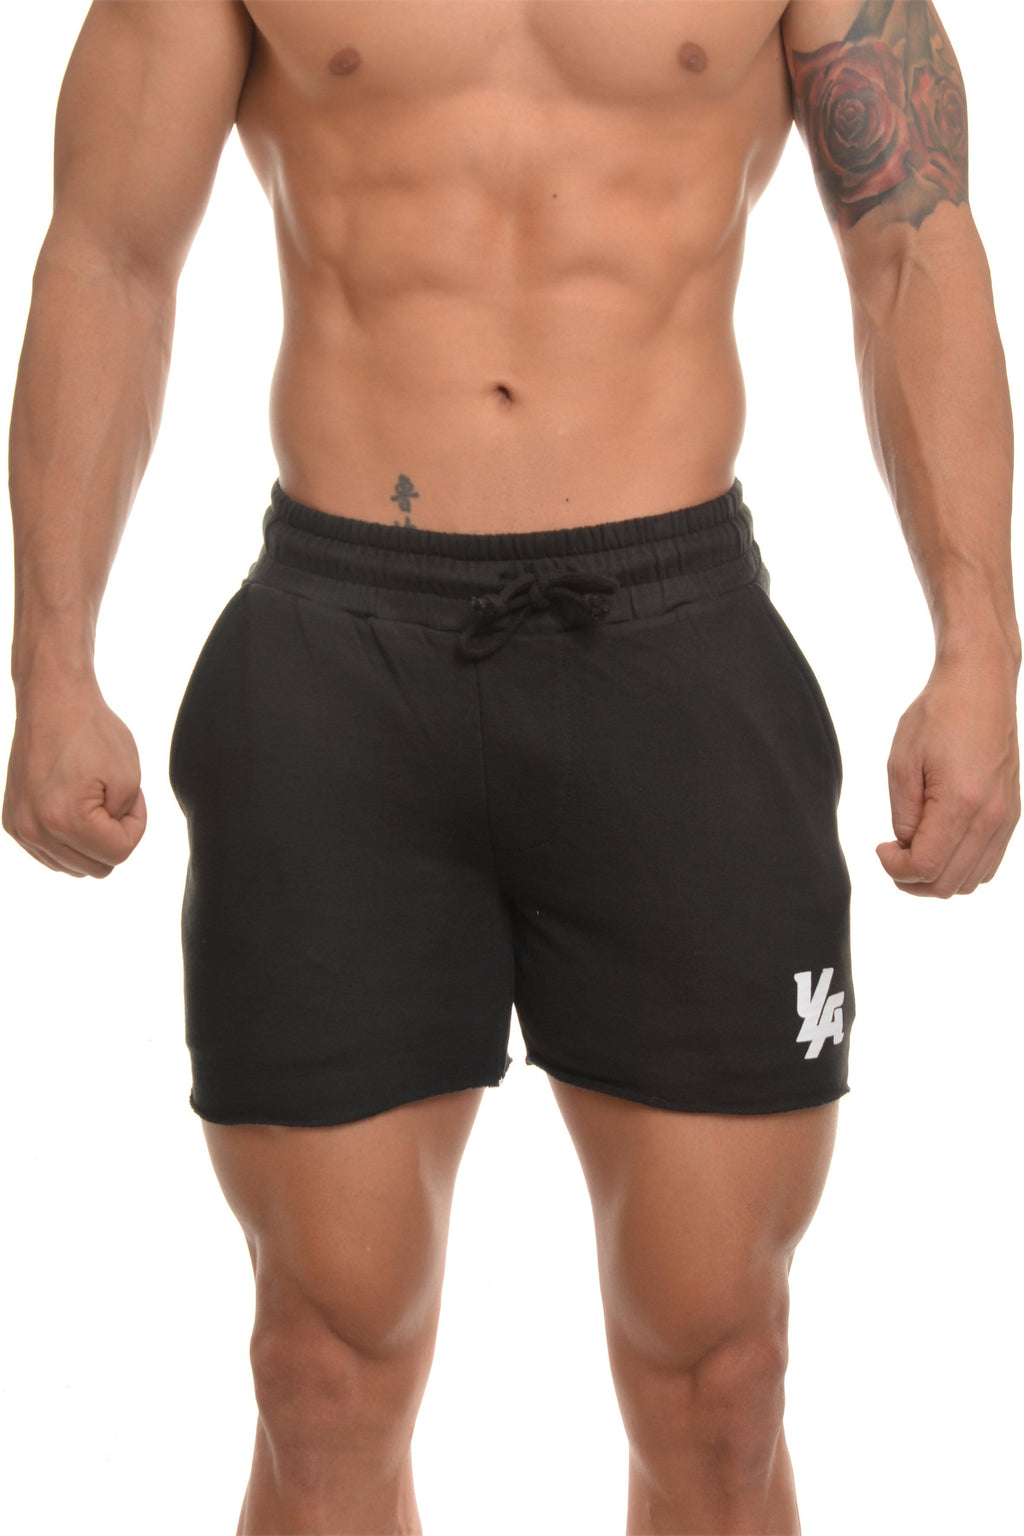  Men's Fitted Shorts Bodybuilding Workout Gym Running